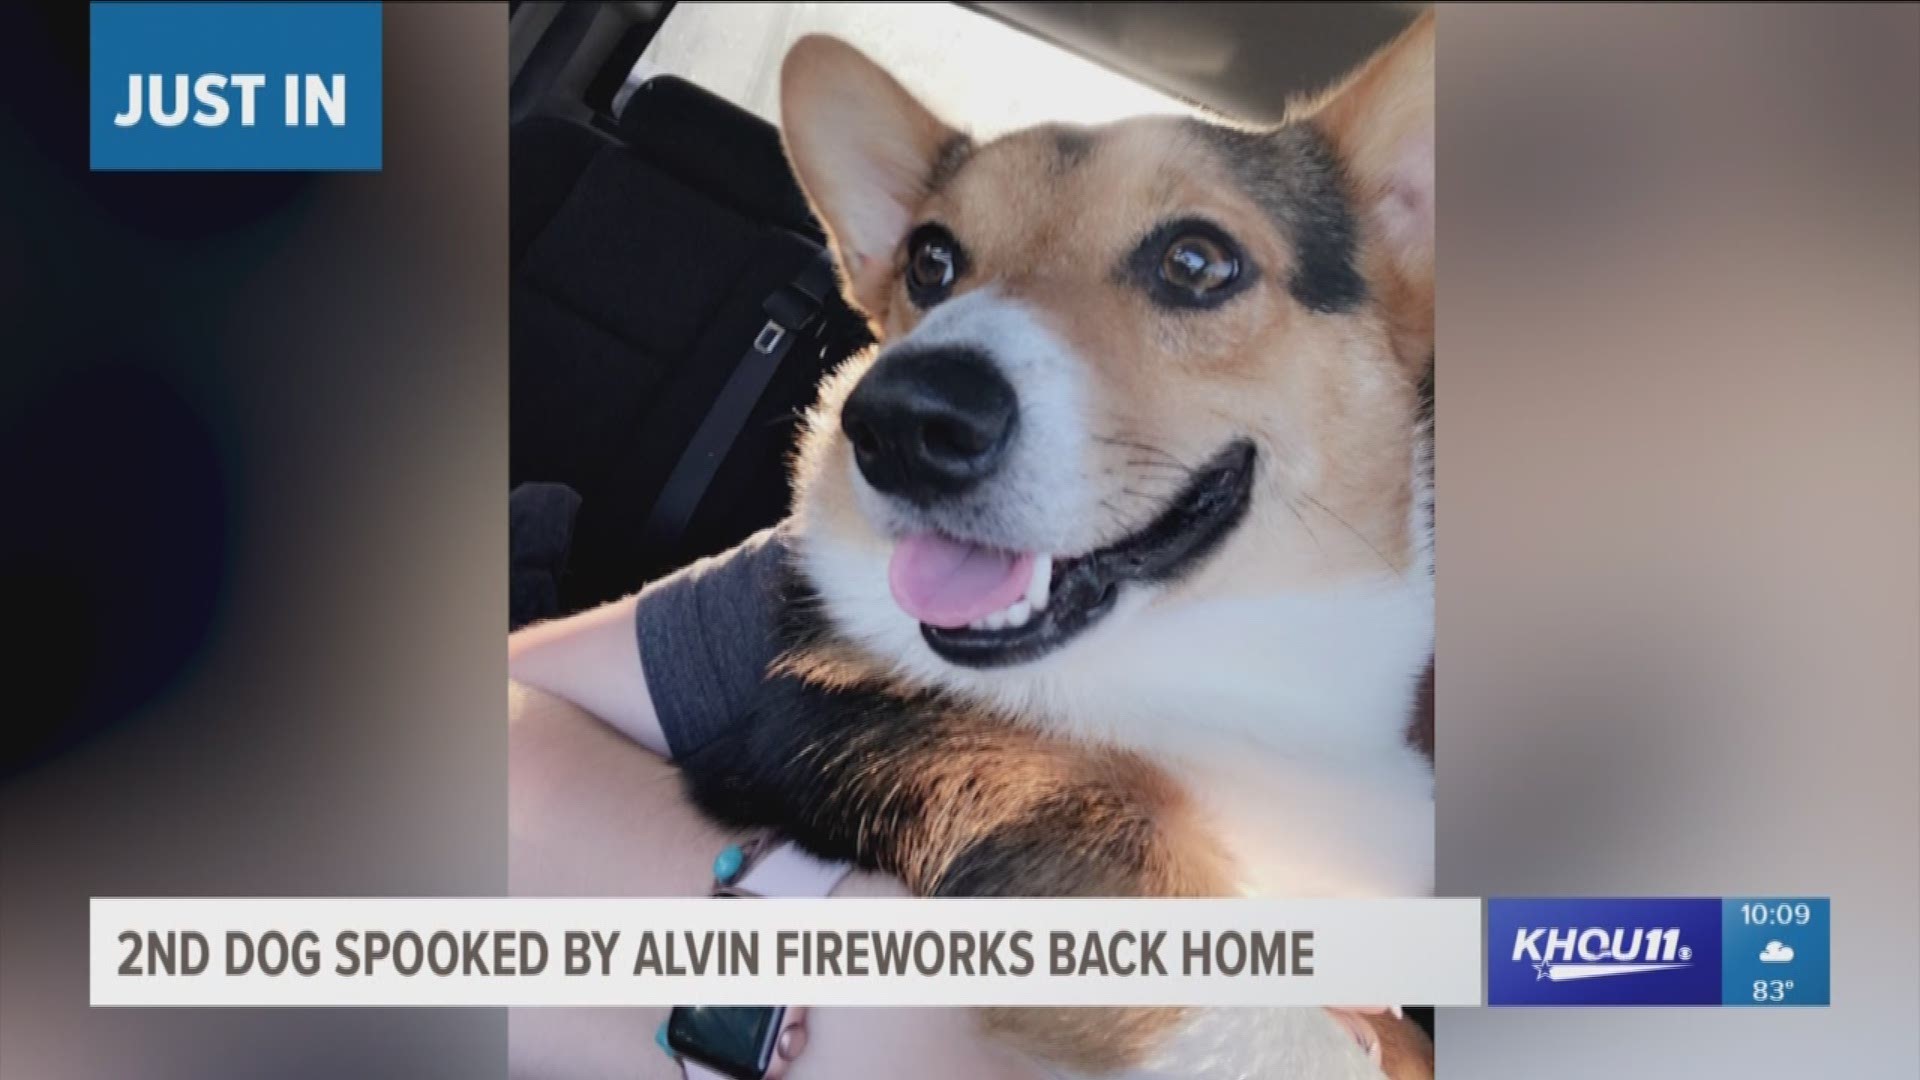 One of two dogs that ran away in Alvin last Friday after getting spooked by fireworks was reunited with his owner Wednesday.